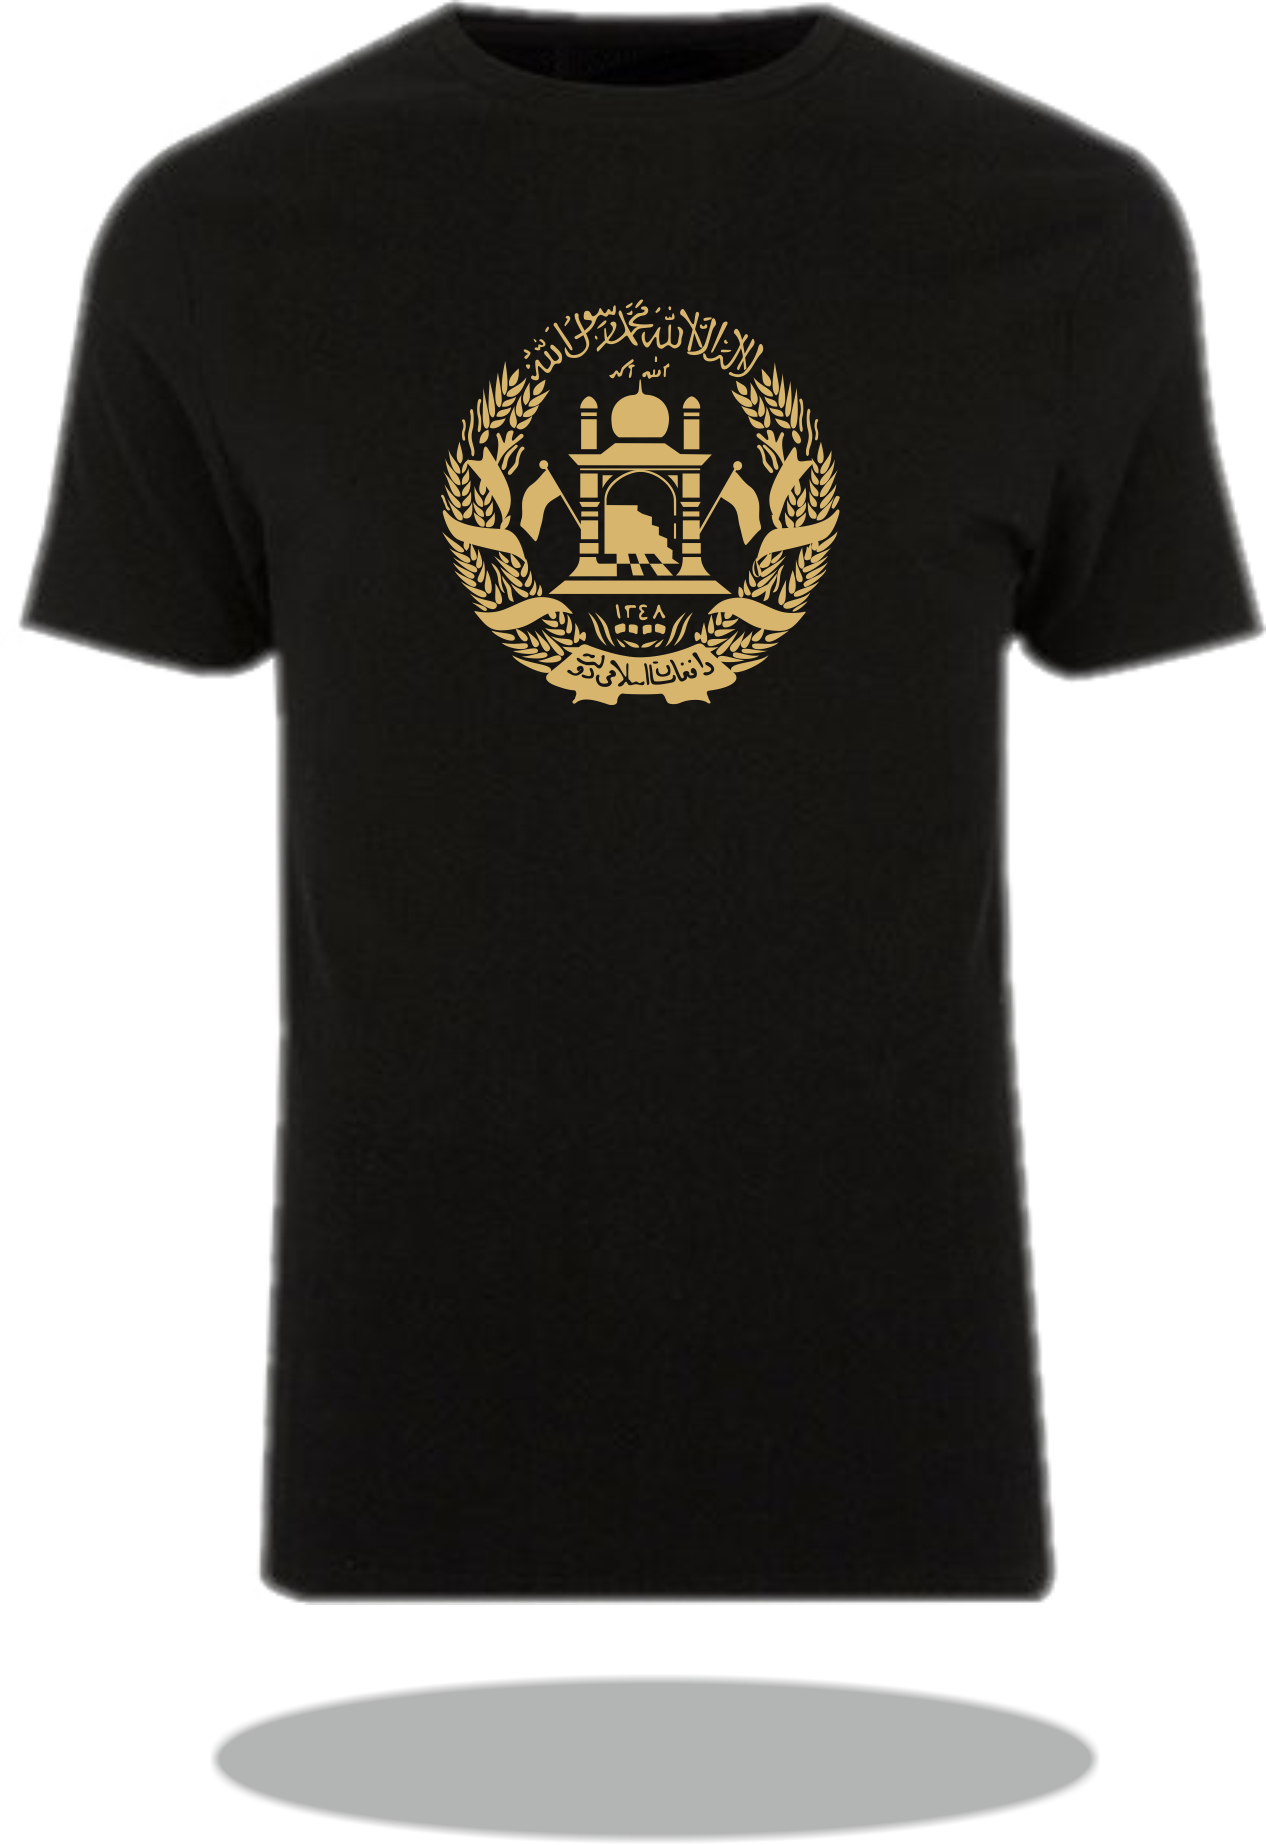 T-Shirt Wappen Afghanistan / Afghanistan Coat of Arms